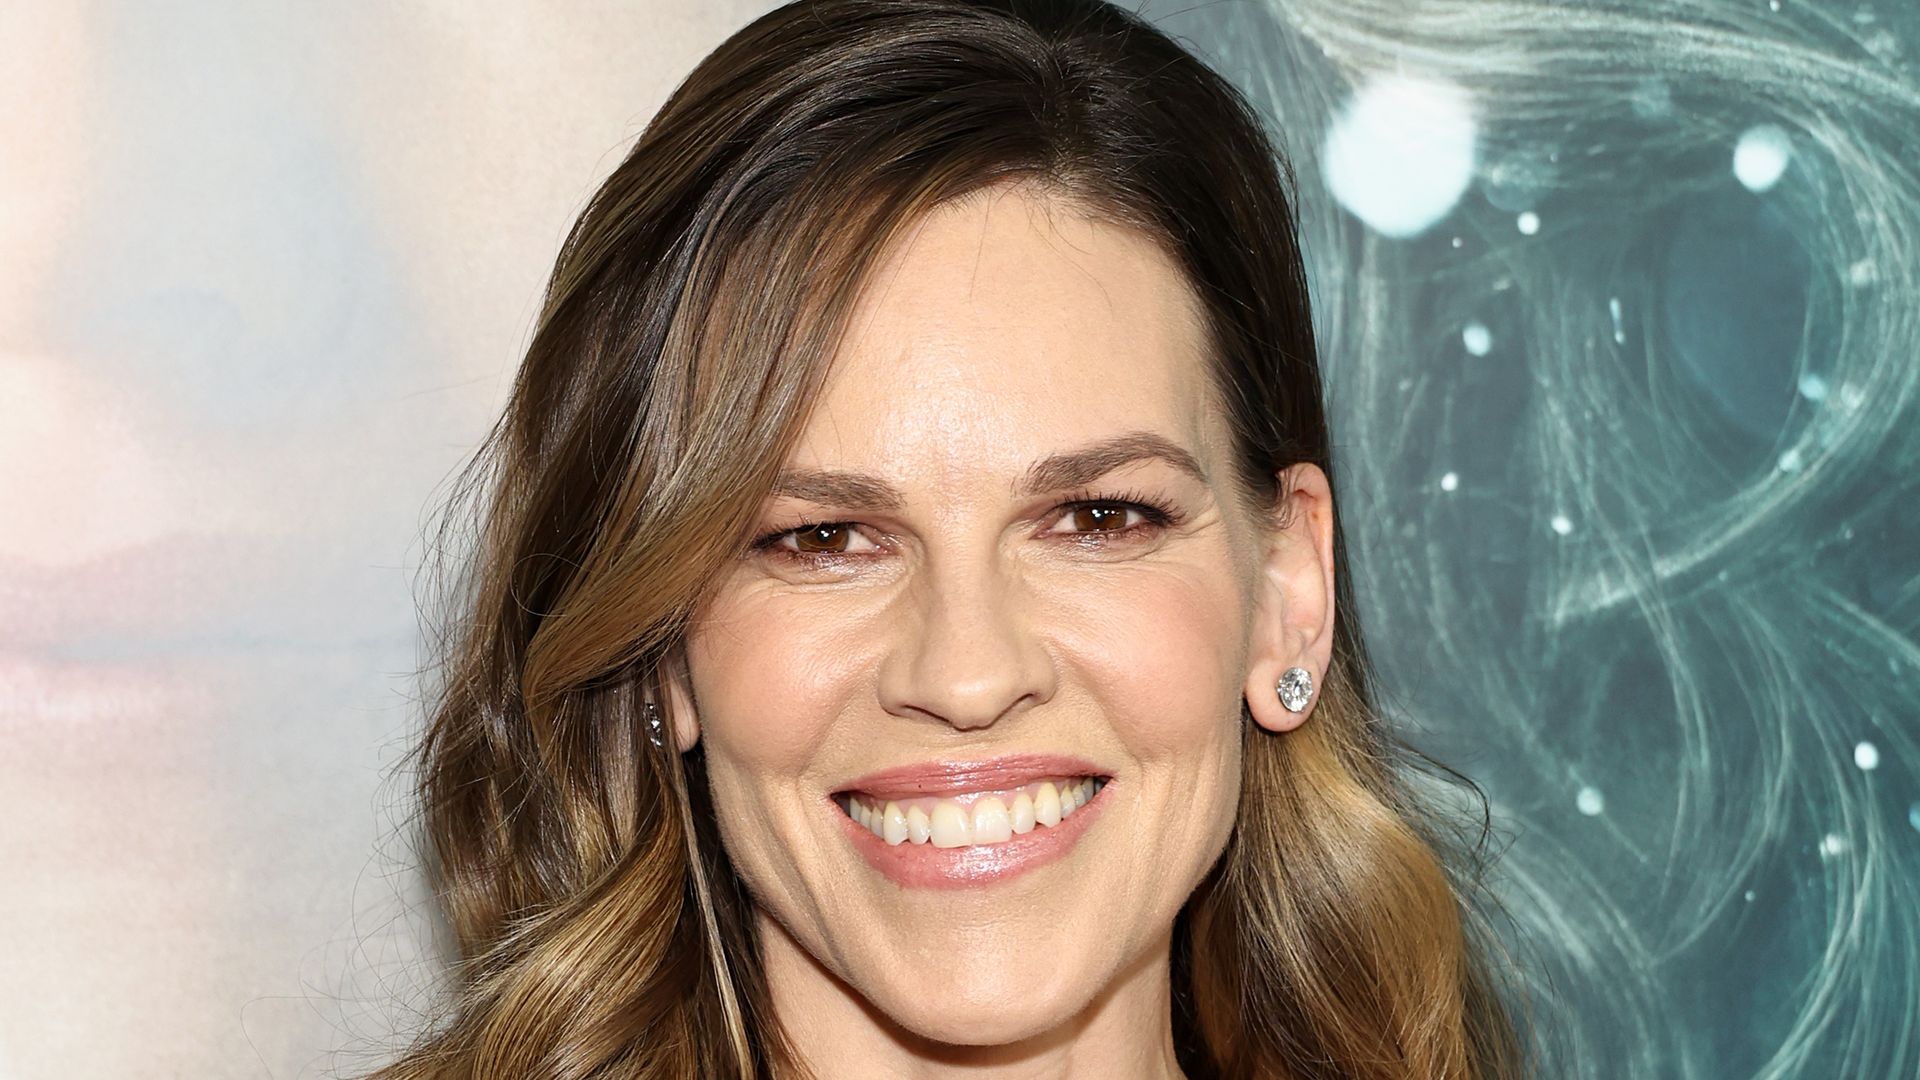 Hilary Swank, 49, reveals what surprised her the most about motherhood since welcoming twins